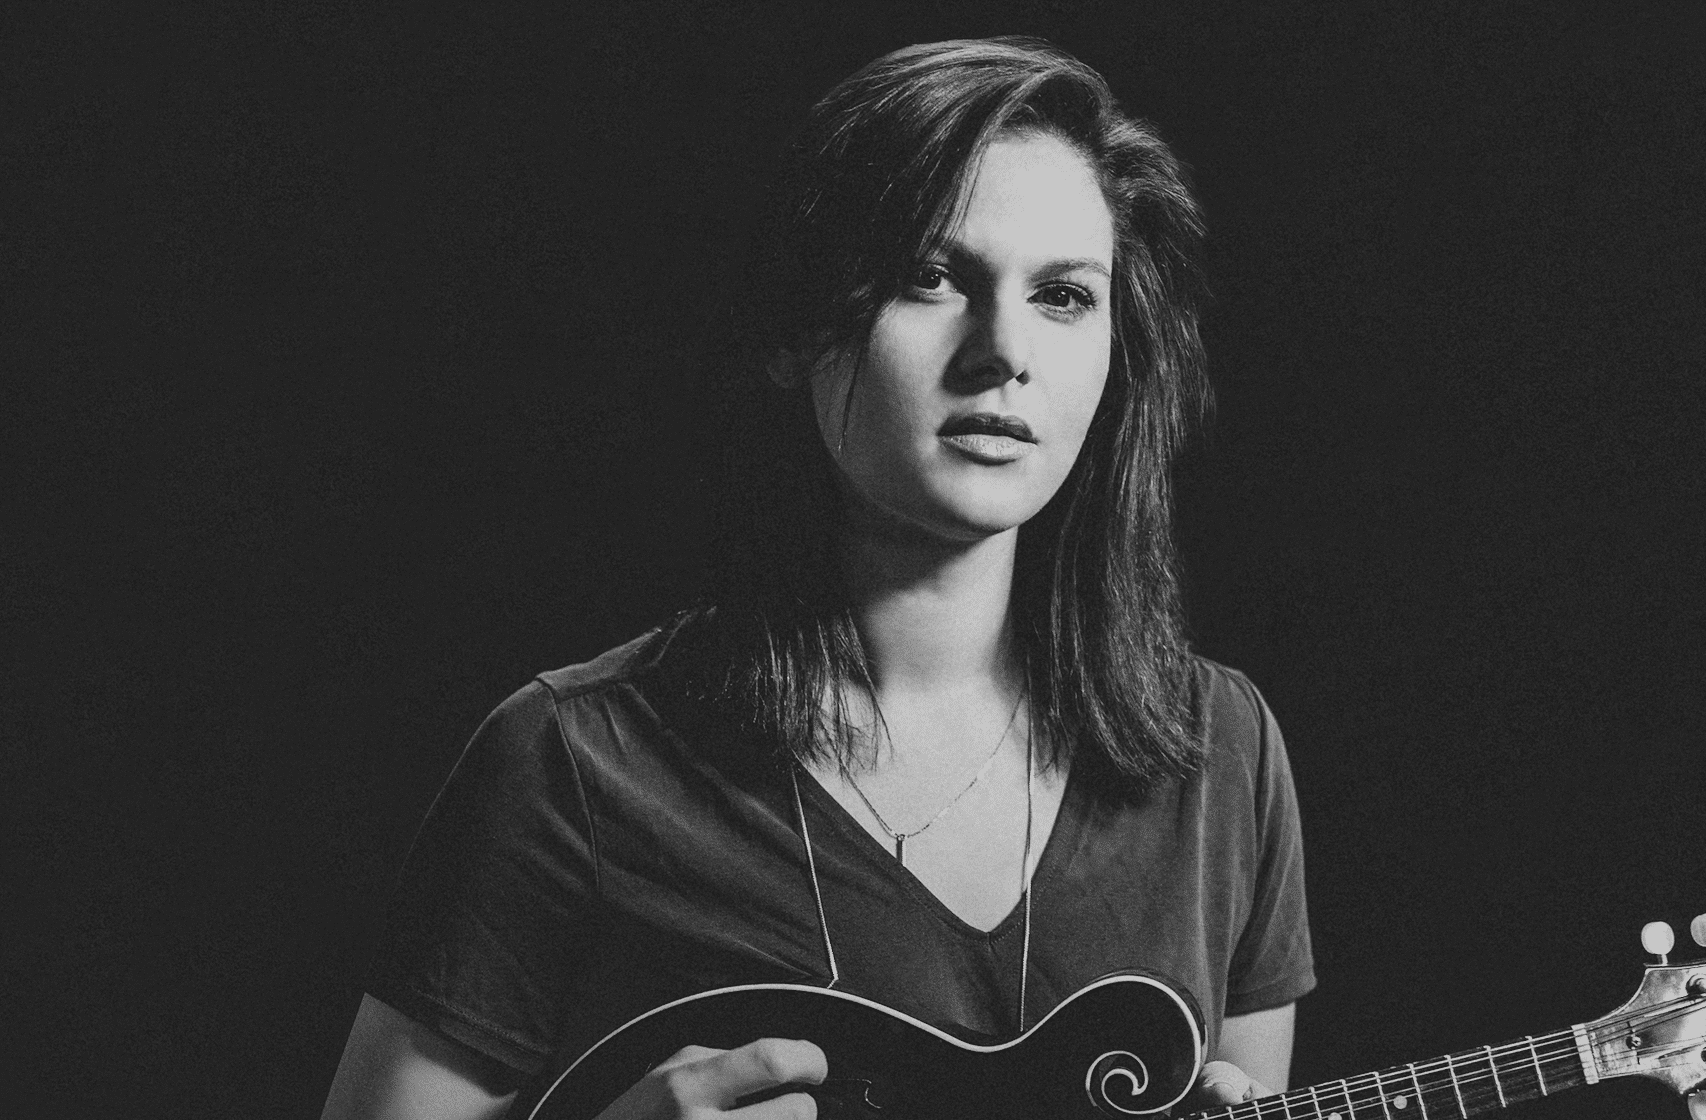 Marie Miller Gets Re-acquainted with Her Roots Through “Wayfaring Stranger”